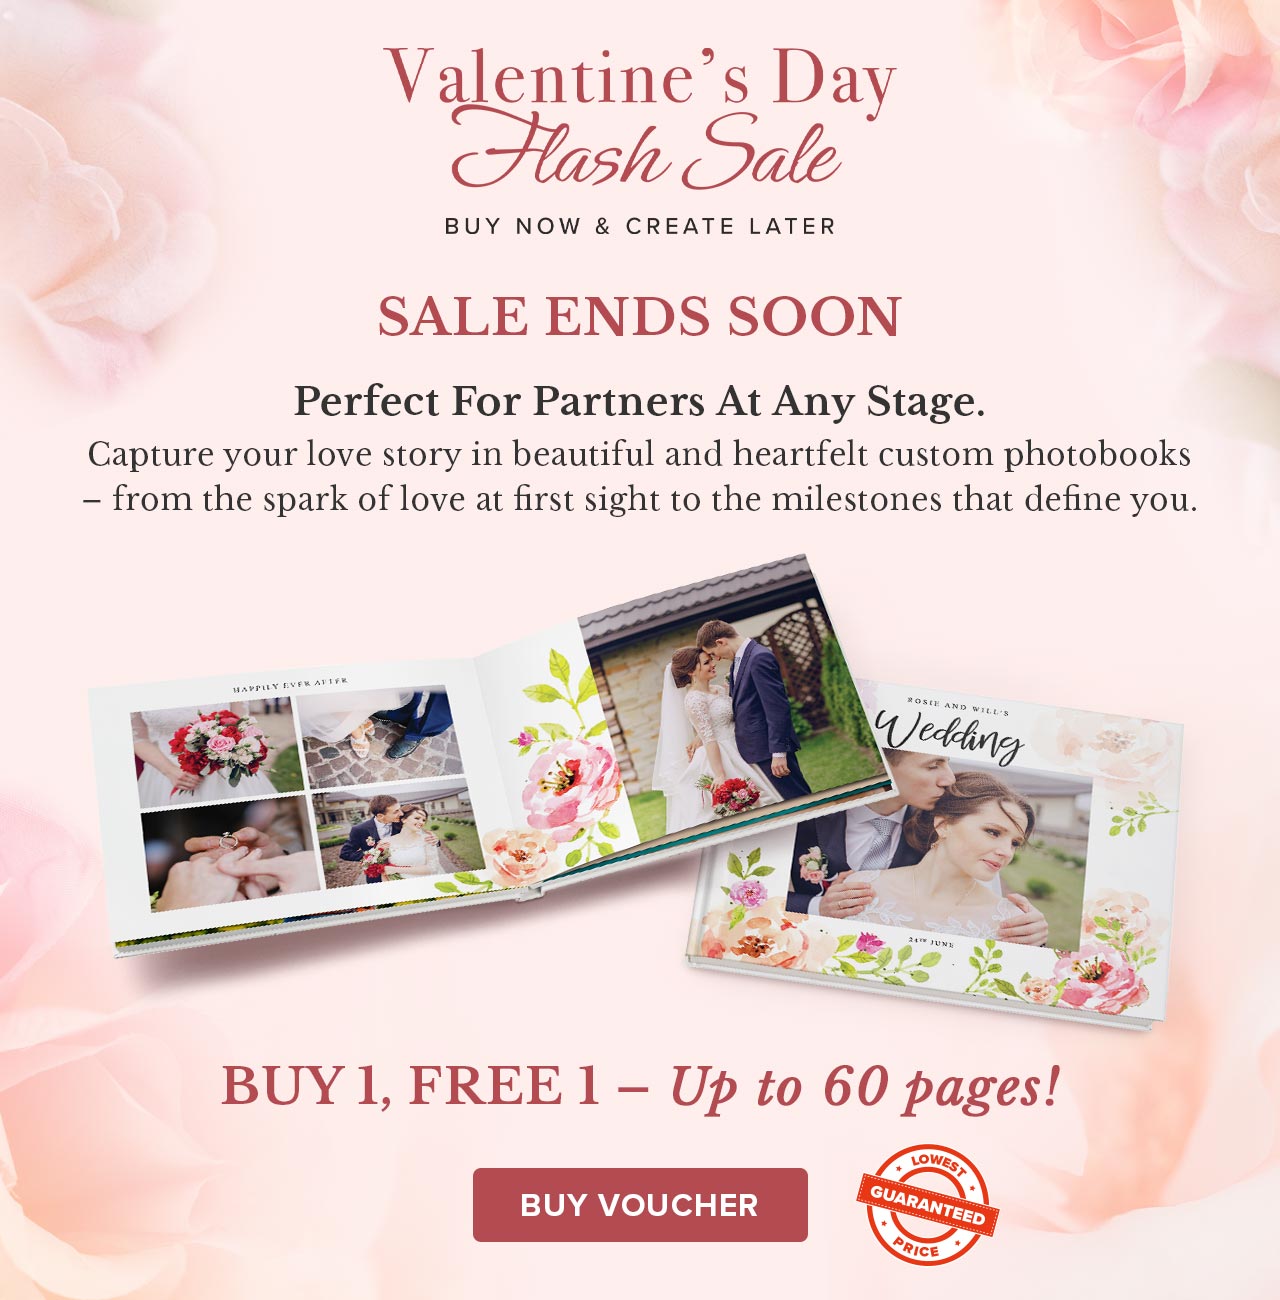 BUY 1, FREE 1 – Up to 60 pages! | BUY VOUCHER